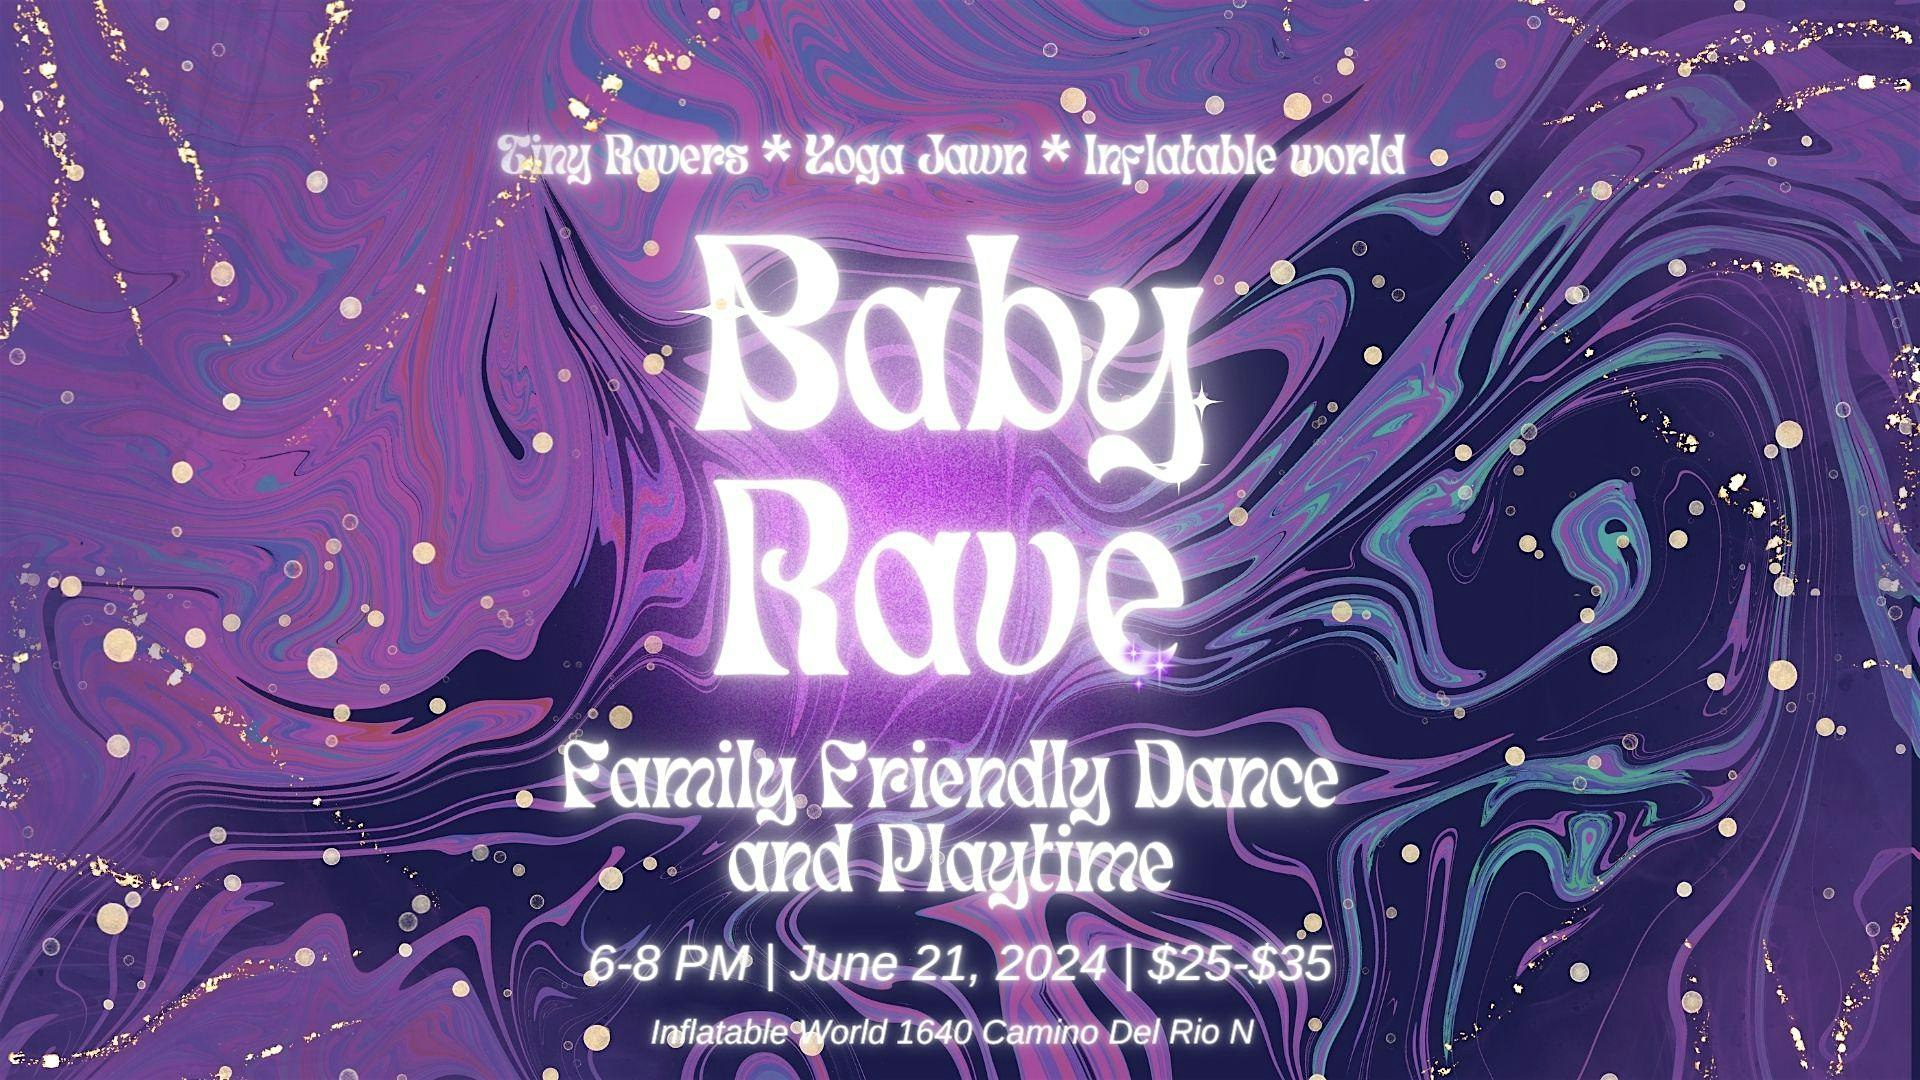 Baby Rave: Family friendly dance party at Inflatable World